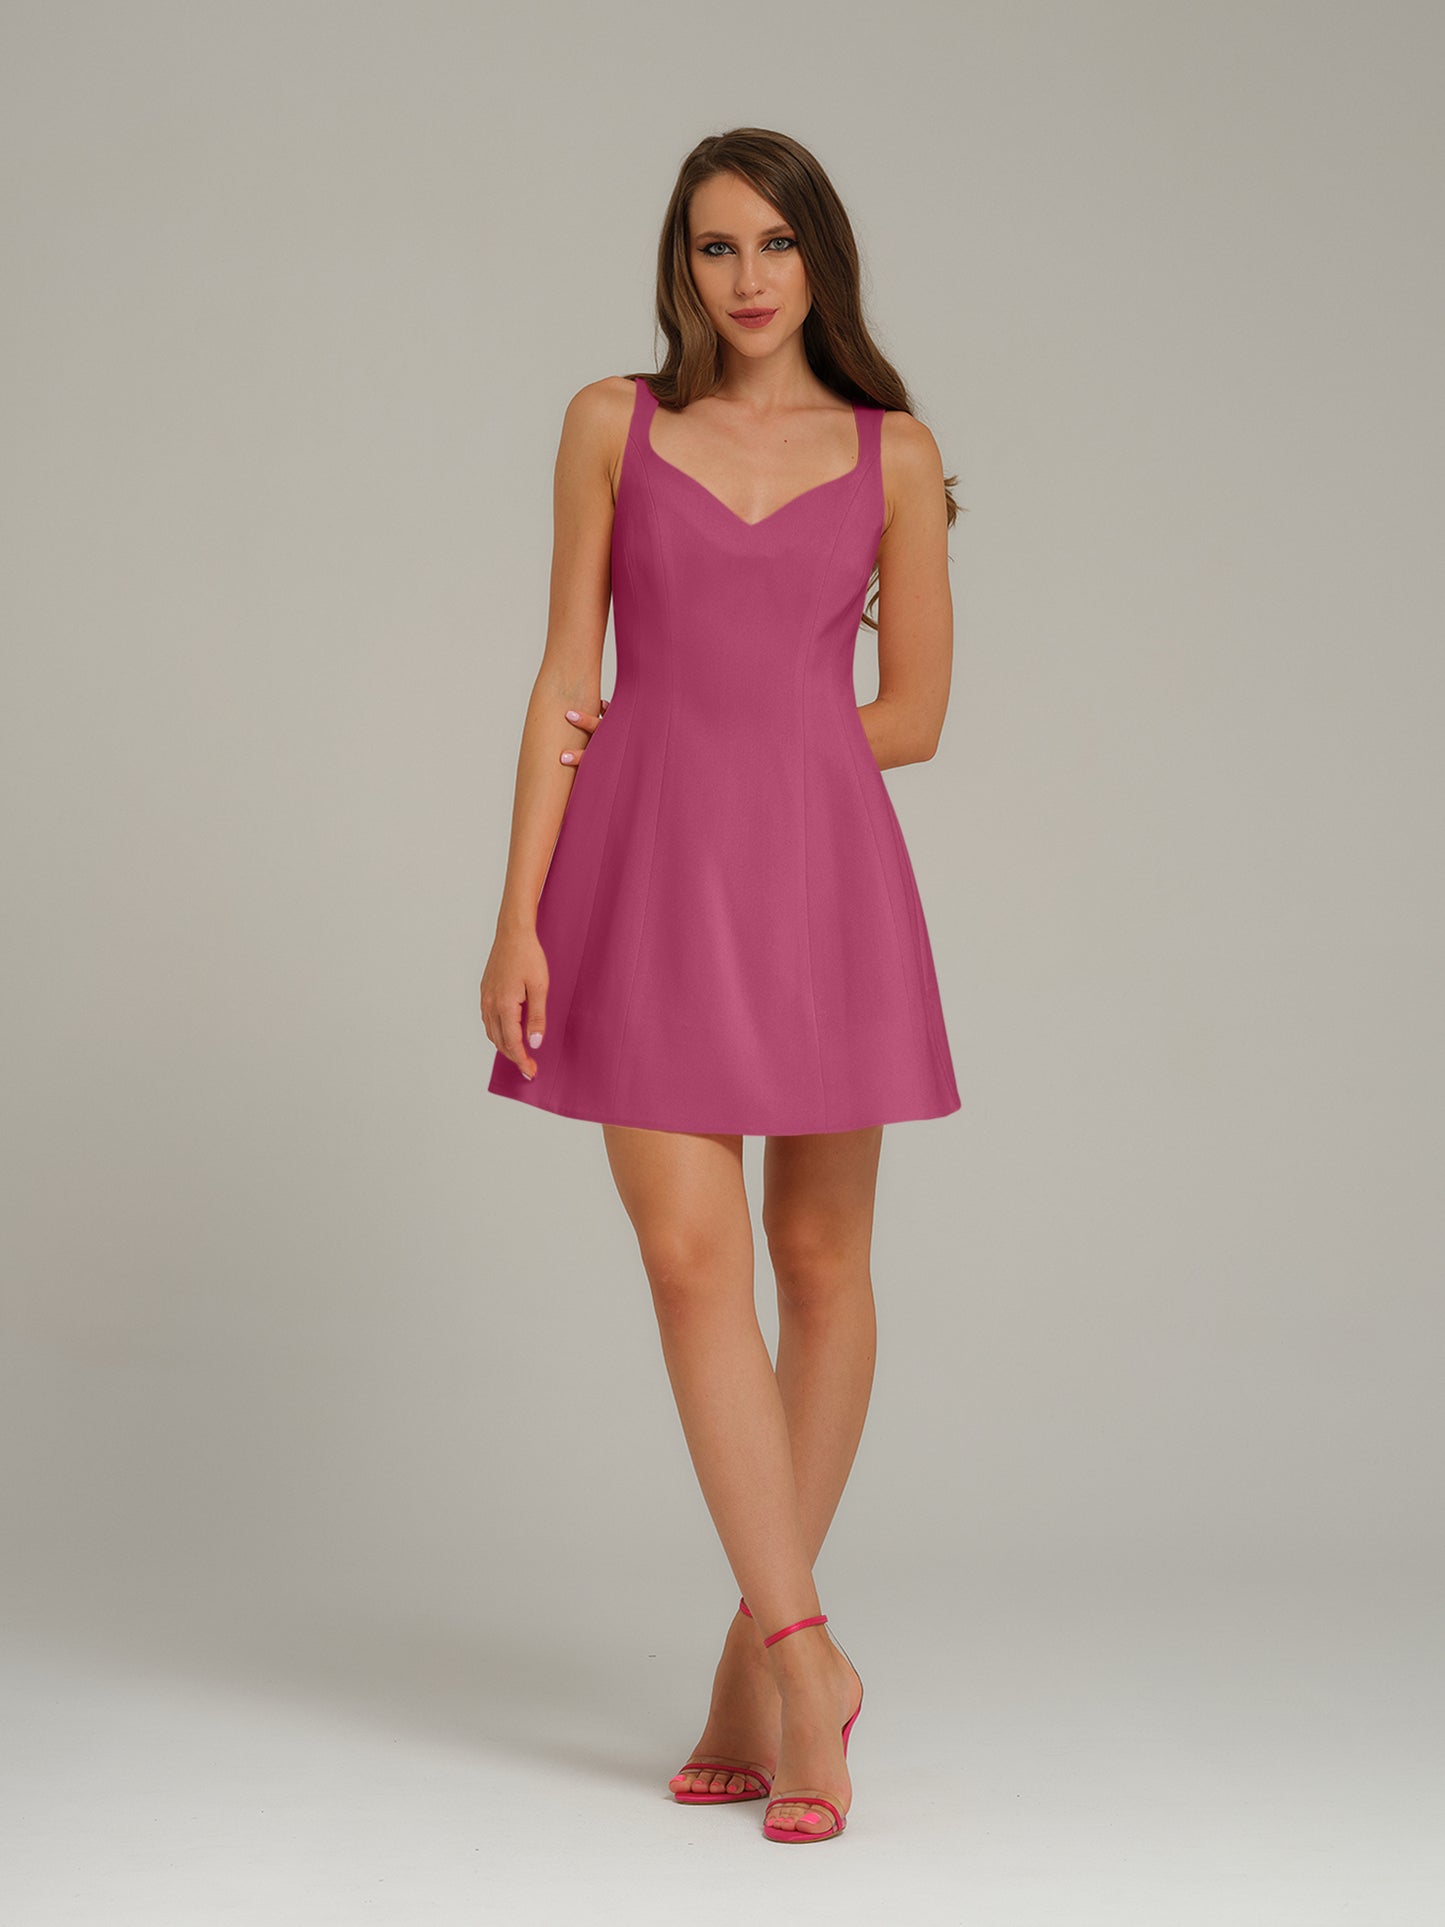 Tia Dorraine Love Letter Flared Mini Dress - Sweet Desire Pink Bring an air of effortless femininity to your edits with this romantic mini dress. Its sleeveless silhouette is cut from stretch crepe, detailed with a flattering sweetheart neckline, and a fl